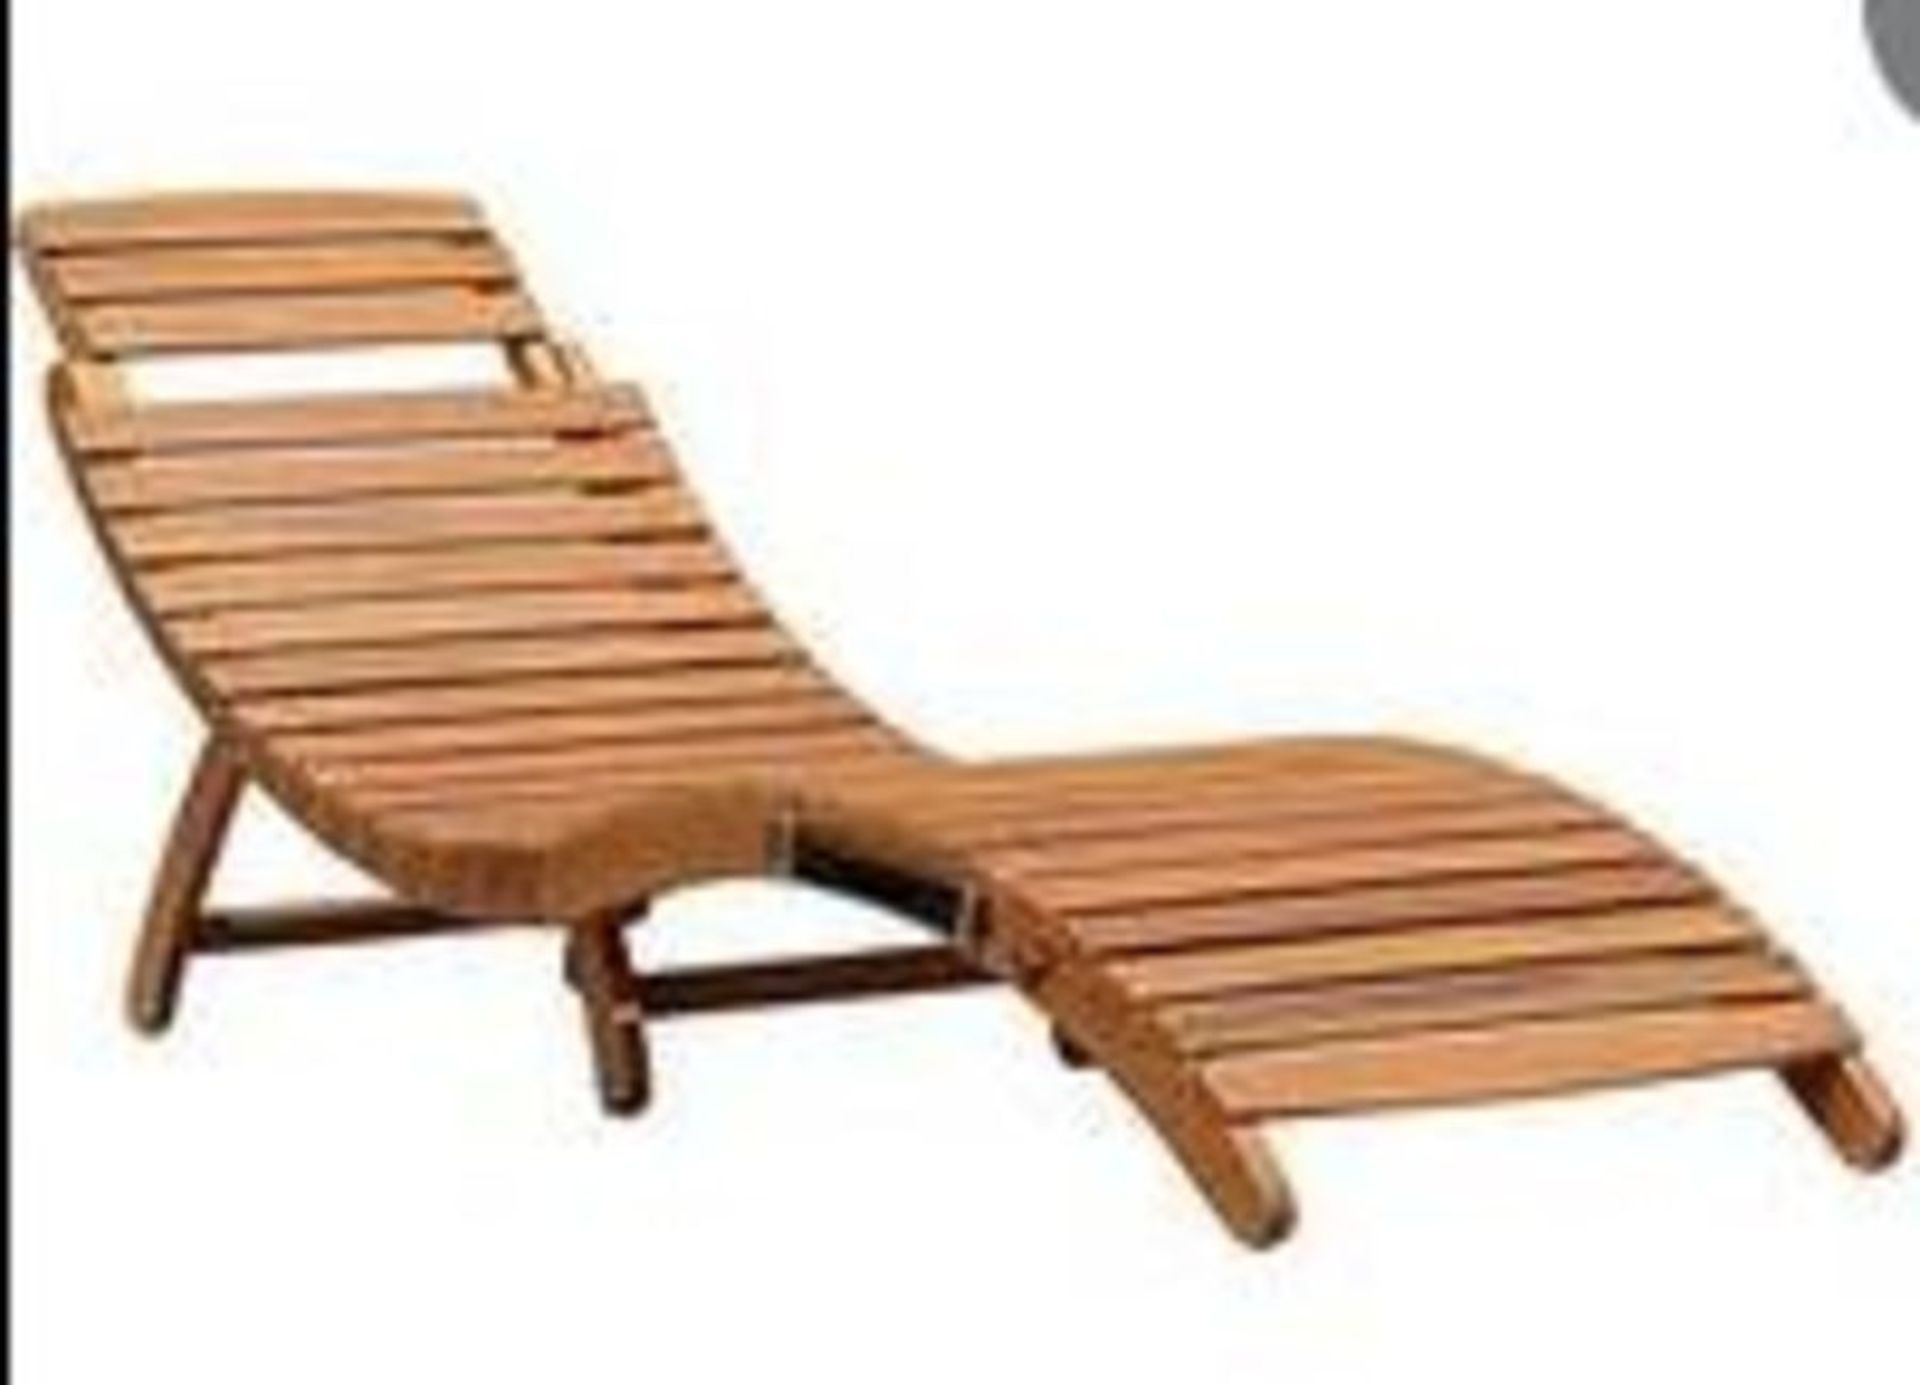 1 X STOCKHOLM LOUNGER (WOODEN) RRP £99.99 / UNTESTED CUSTOMER RETURNS